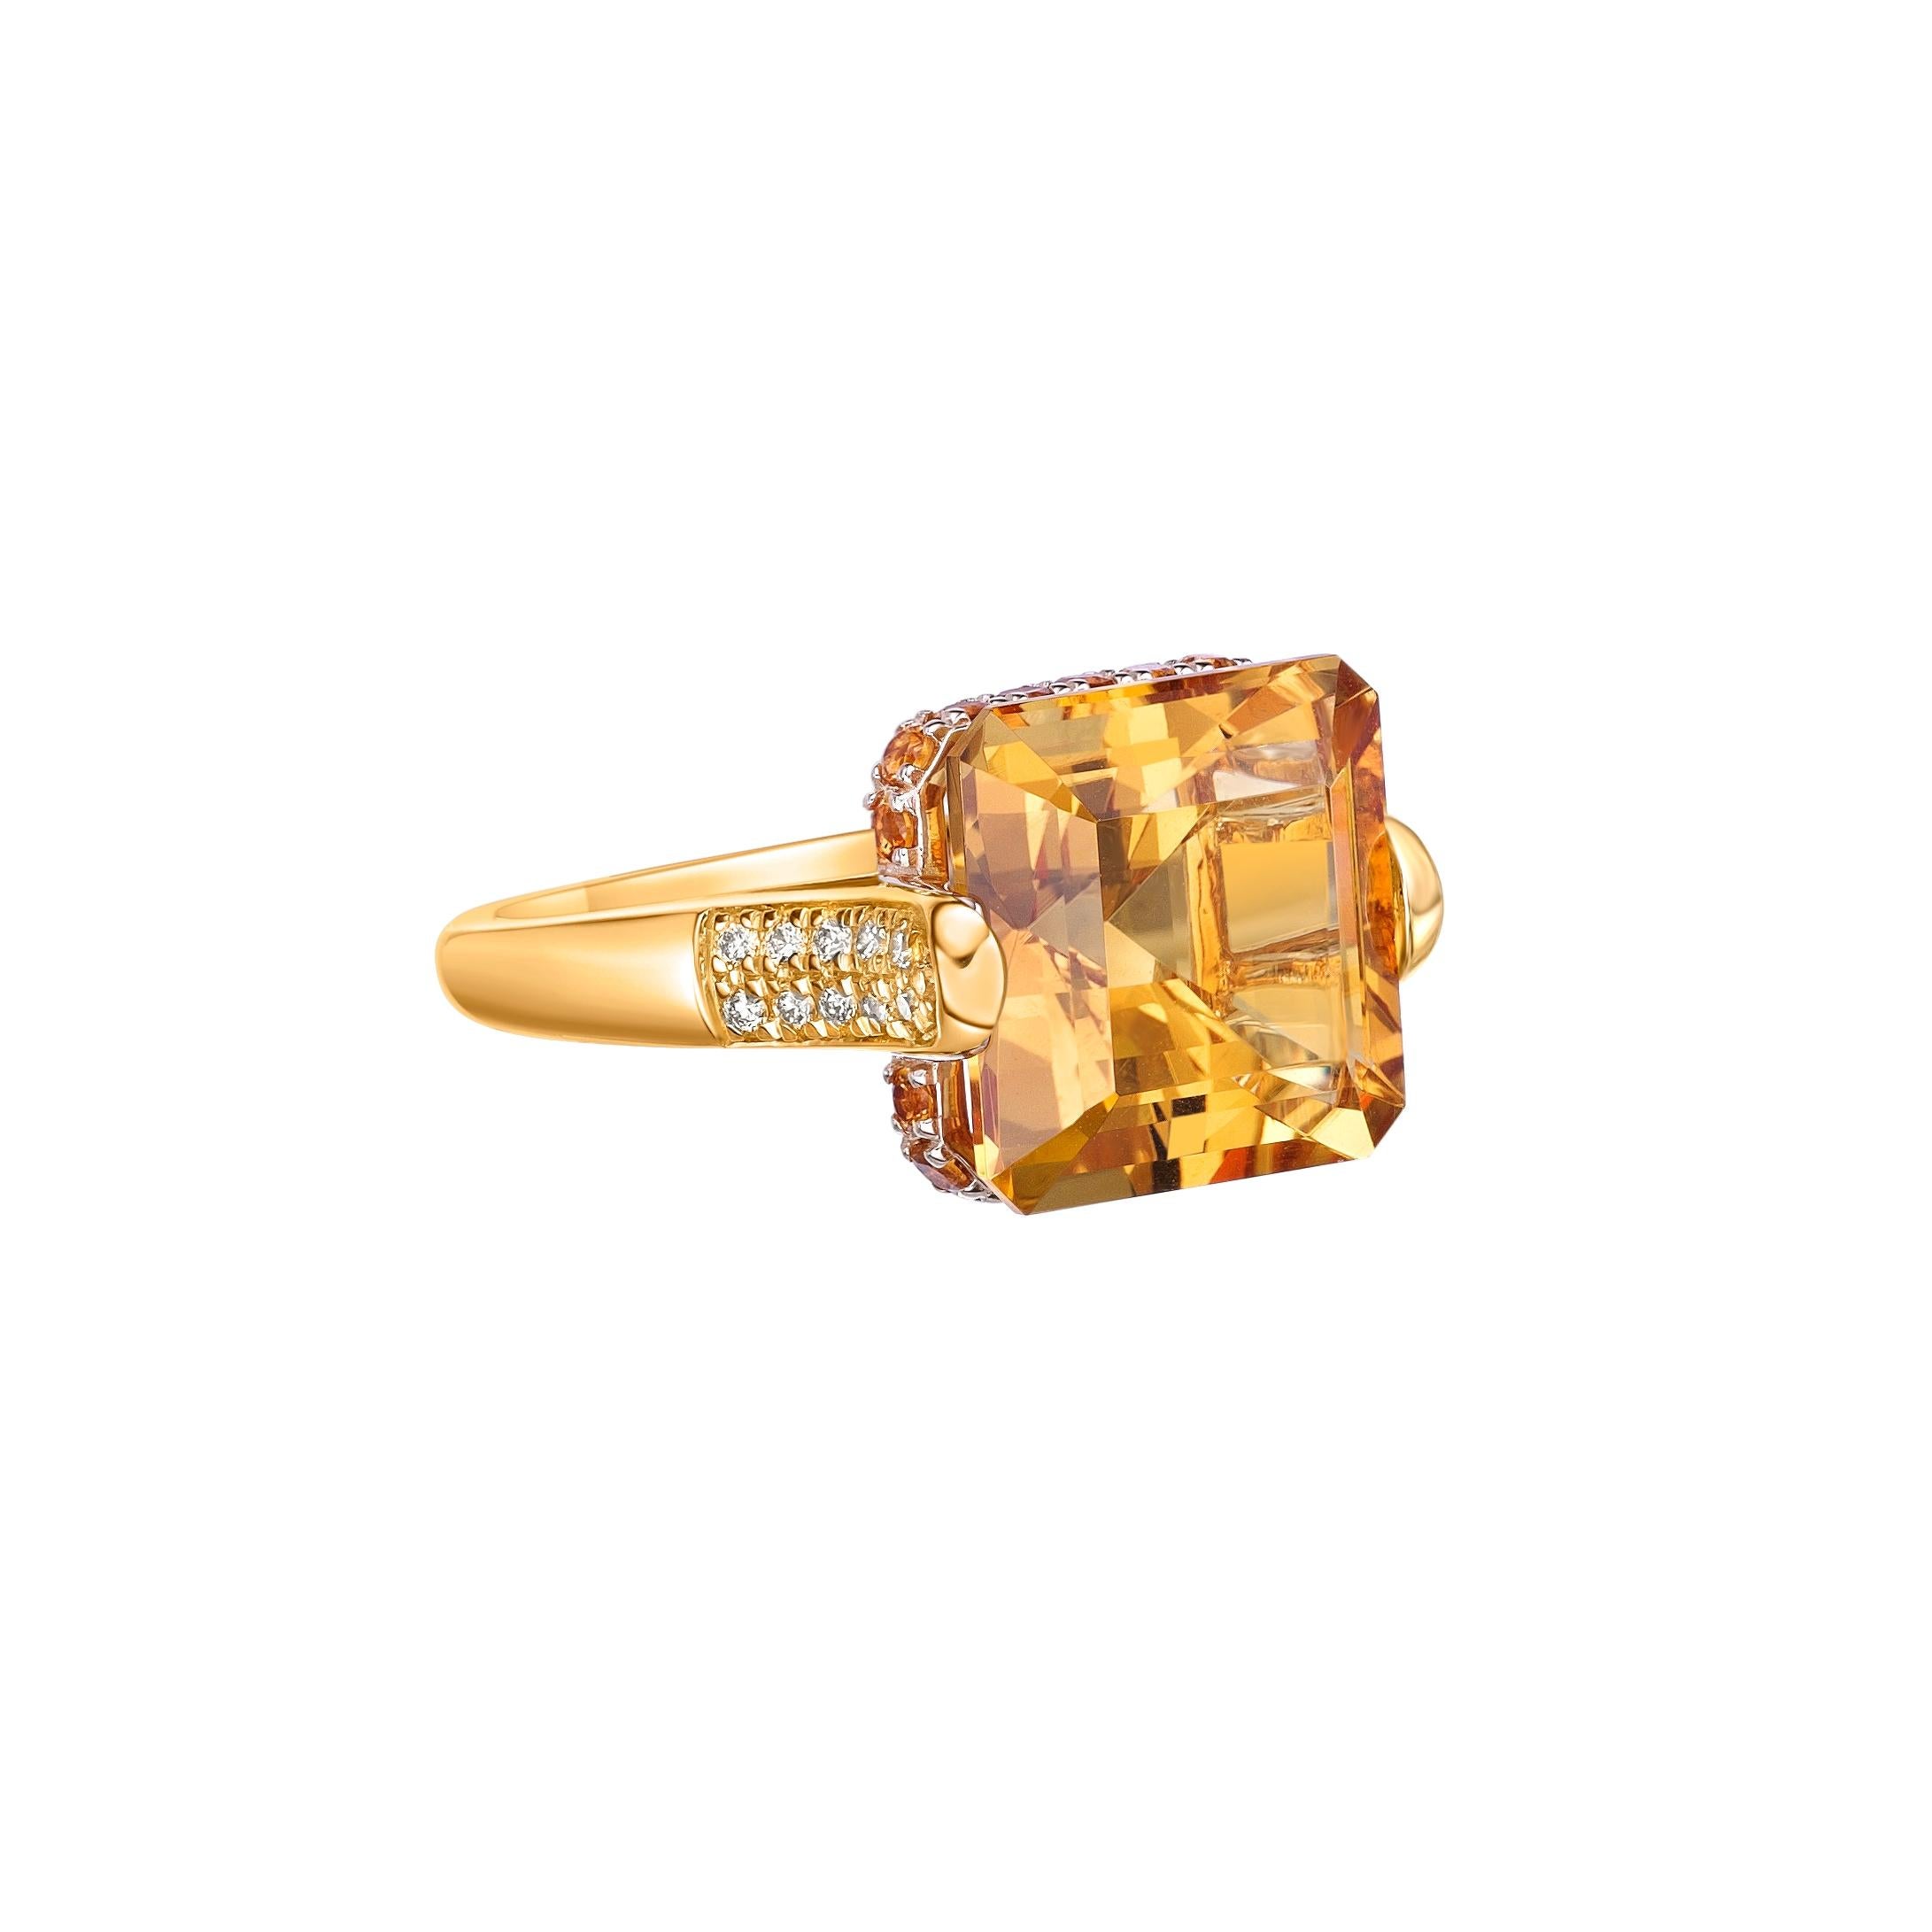 This is fancy Citrine Ring in Octagon shape purple hue. The Ring is elegant and can be worn for many occasions. The Citrine around the ring add to the beauty and elegance of the ring.

Citrine Fancy Ring in 18Karat Yellow Gold with White